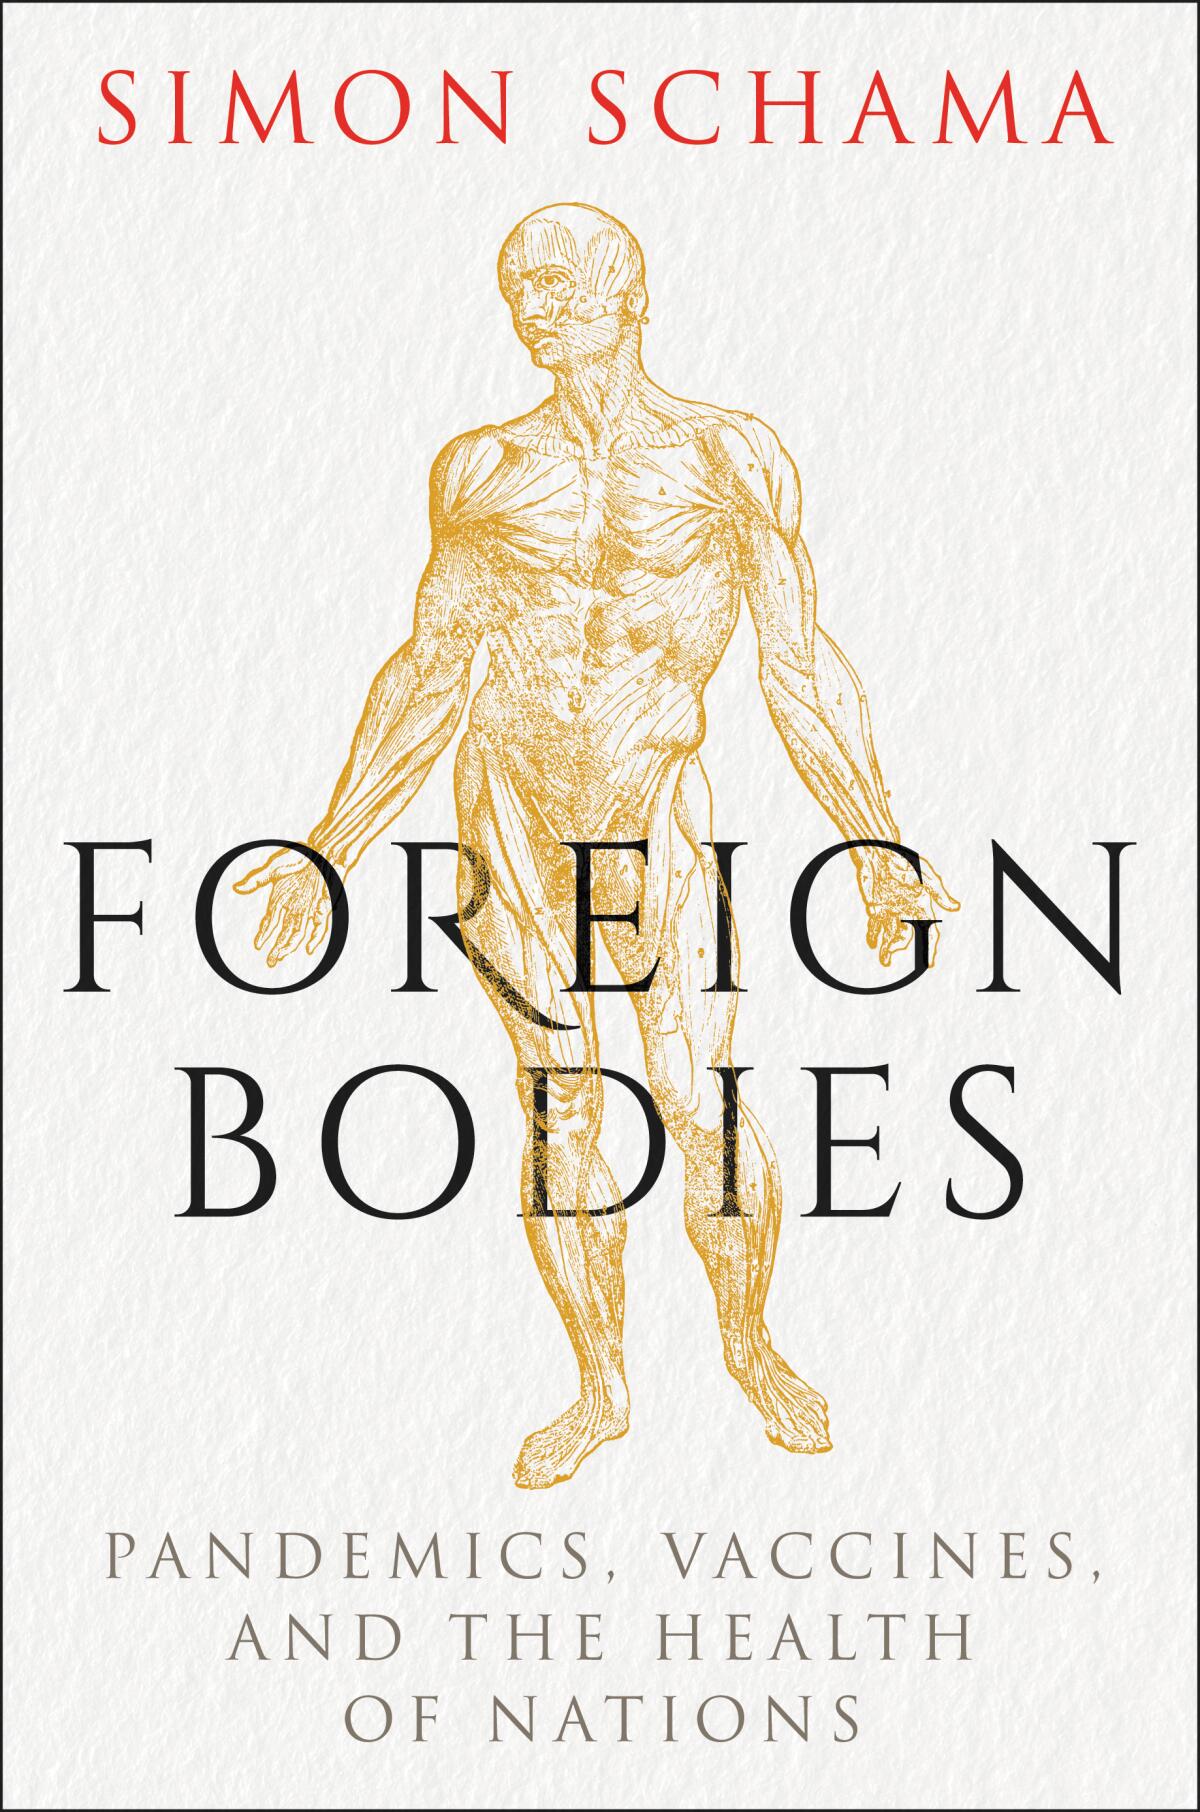 The cover of "Foreign Bodies" by Simon Schama features an illustration of a figure with his skin peeled back.